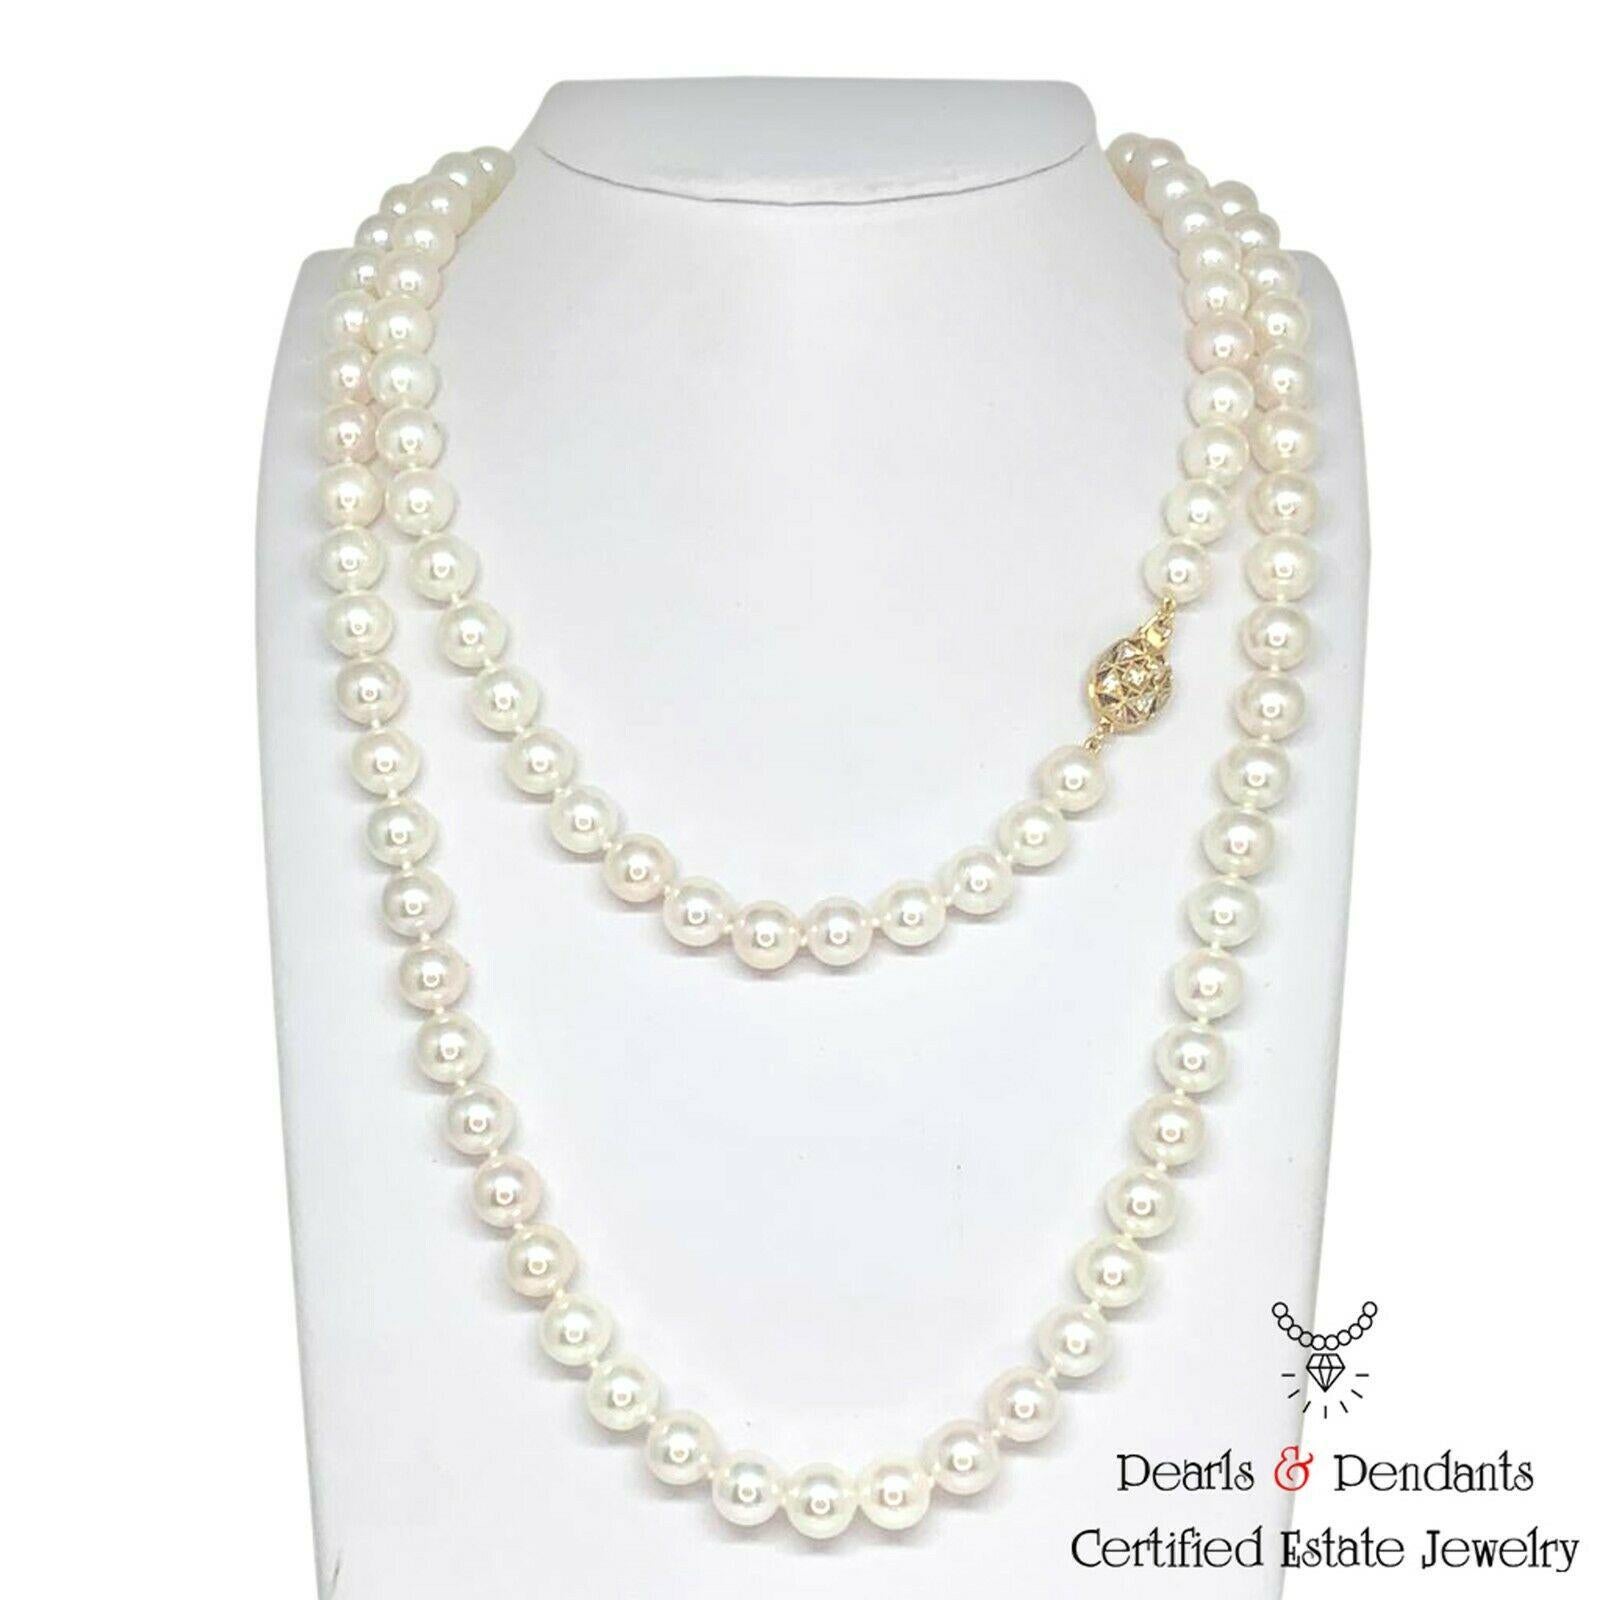 Fine Quality Akoya Pearl Diamond Necklace 14k Gold 8.5 mm 36 in Certified $9,750 010932

This is a Unique Custom Made Glamorous Piece of Jewelry!

Nothing says, “I Love you” more than Diamonds and Pearls!

This Akoya pearl necklace has been